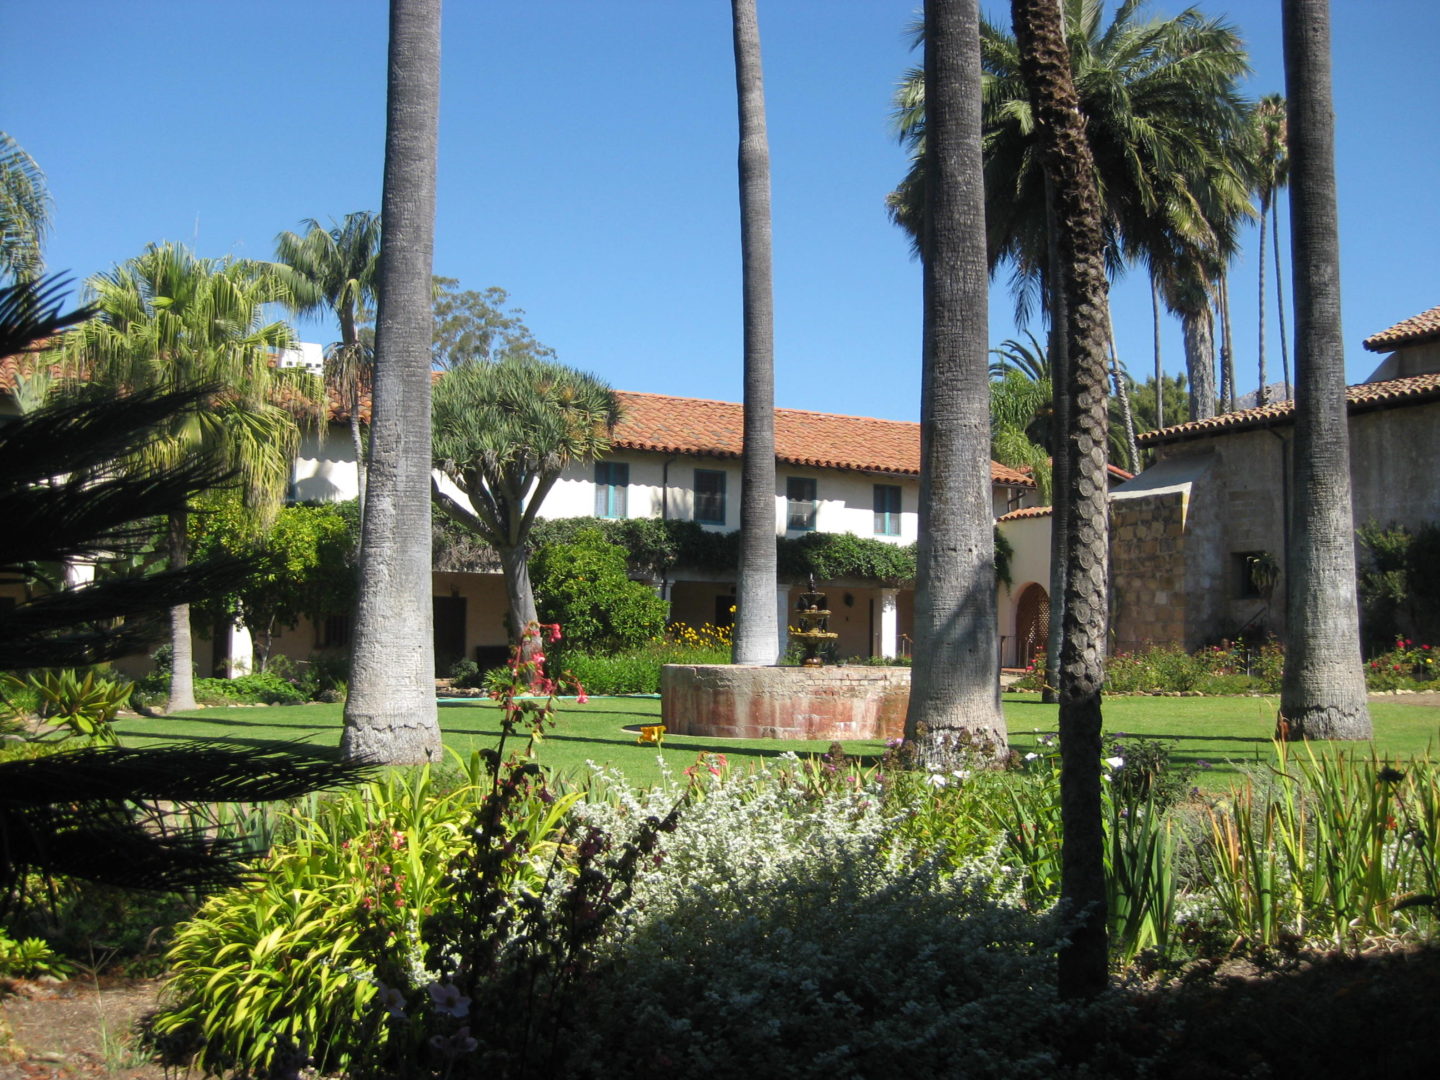 santa barbara mission courtyard with fountain and palm tree view